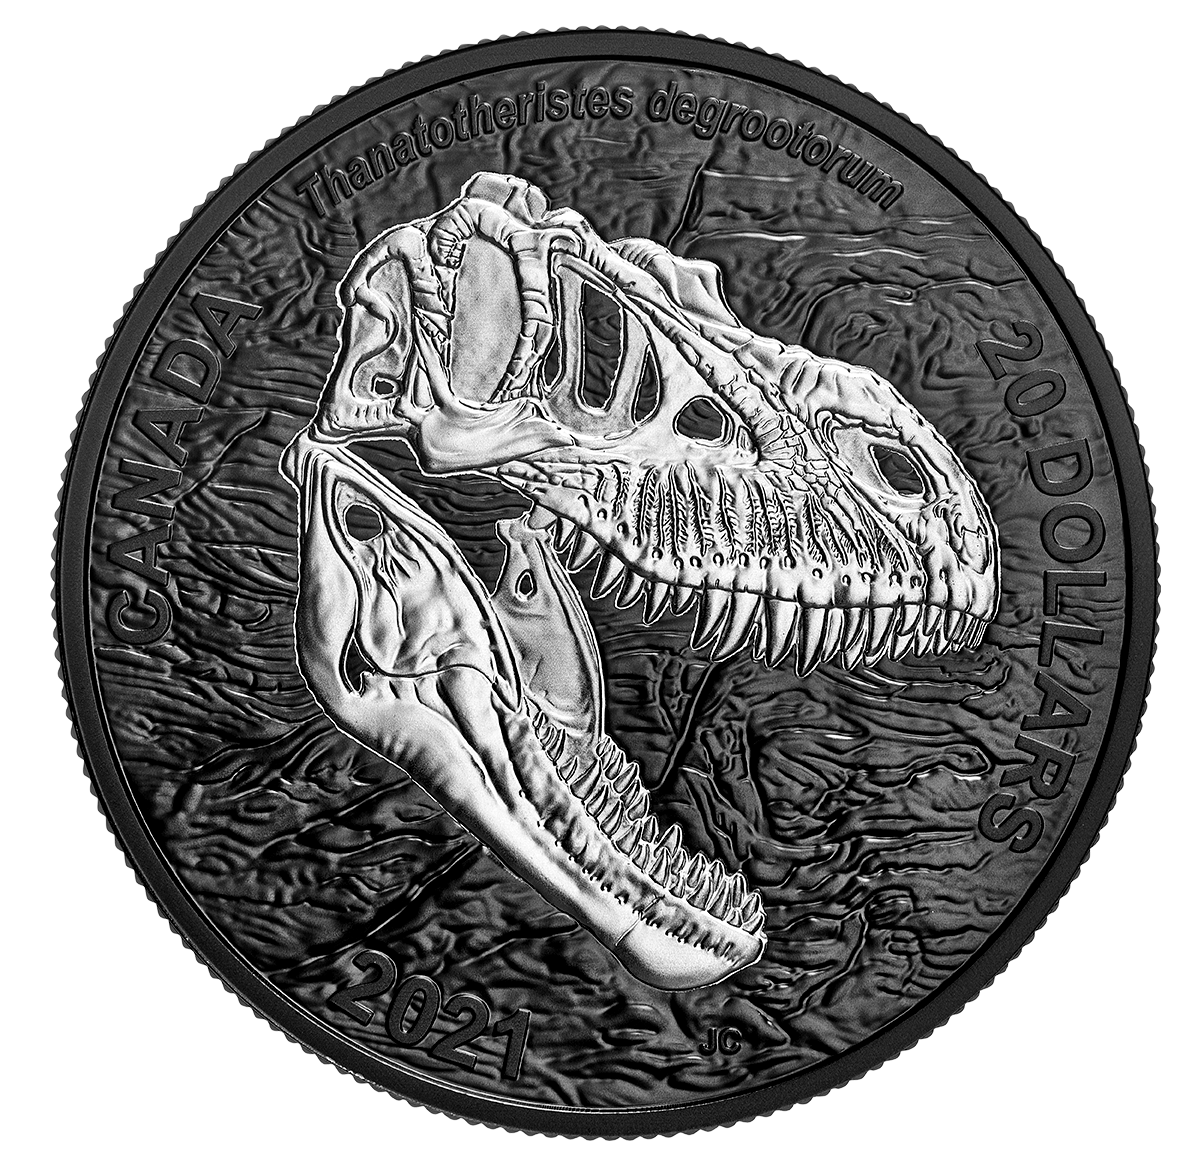 Your dino coin for 2021